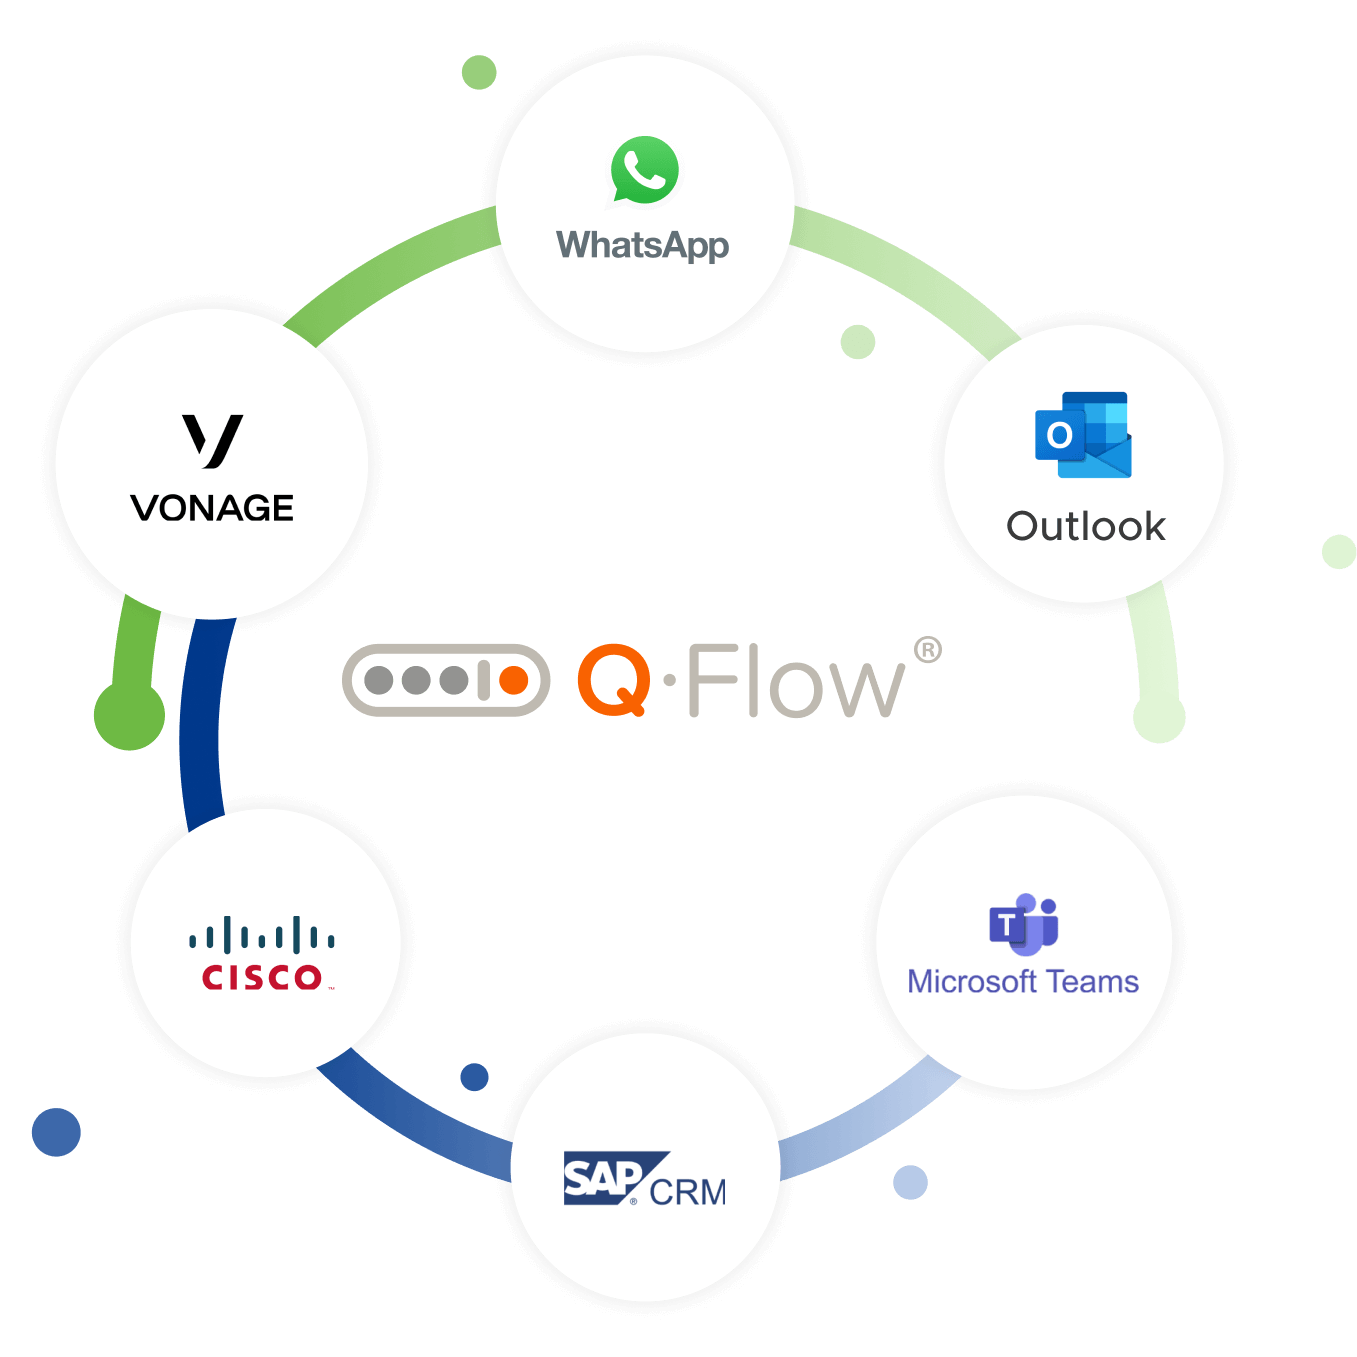 Q-FLOW integration flow with other applications, Microsoft Teams, WhatsApp, Outlook, Cisco, SAP CRM, Vonage